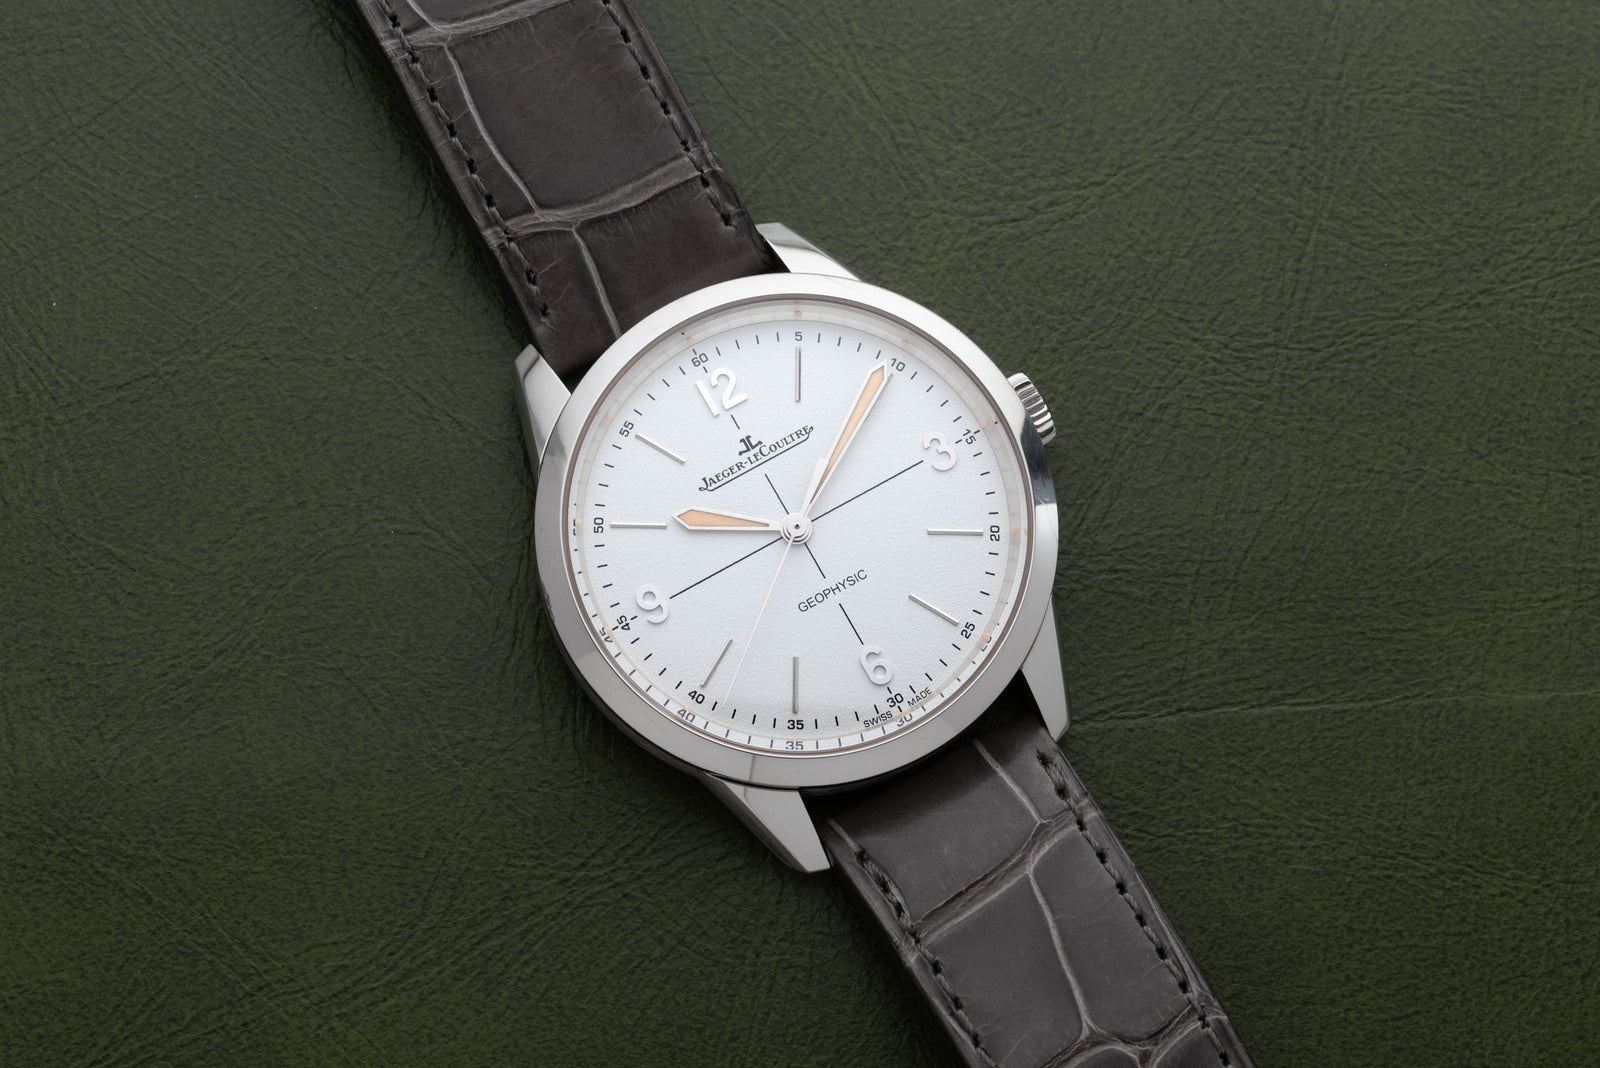 Jaeger-LeCoultre Geophysic Limited Edition